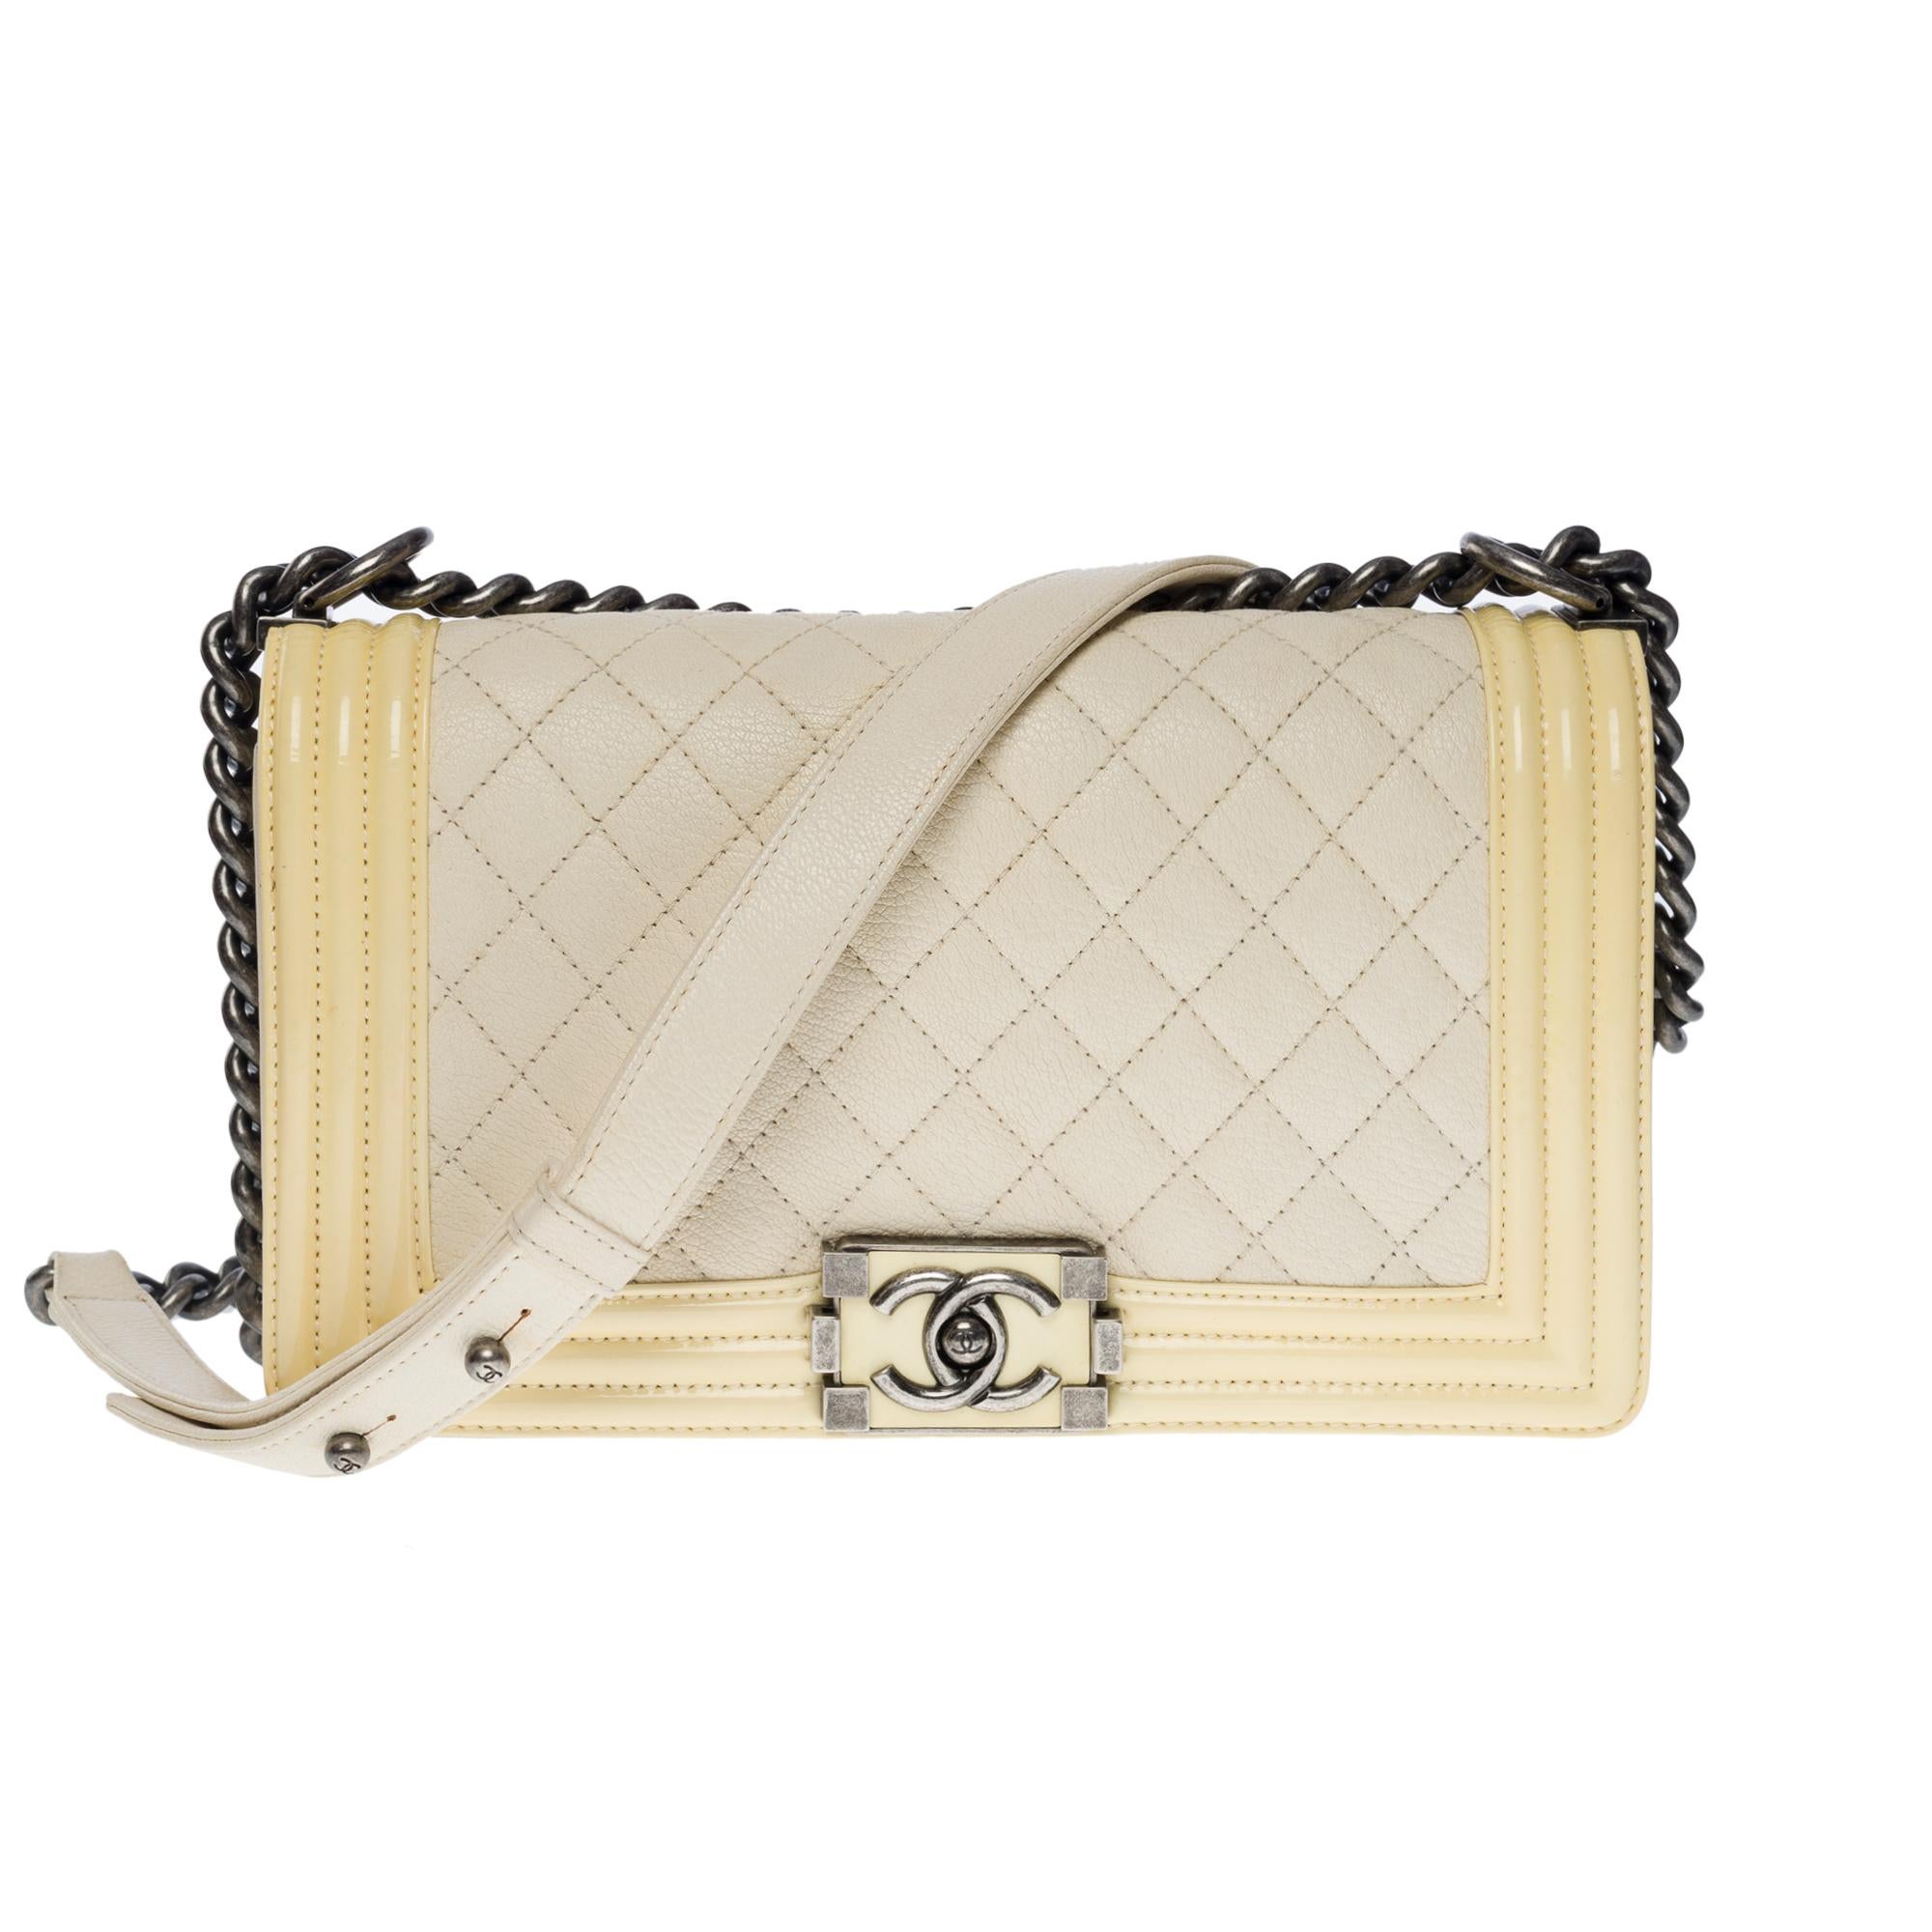 The Iconic Chanel Boy Old Medium shoulder bag in beige caviar leather with yellow varnish outline/frame, ruthenium silver metal hardware, an adjustable ruthenium metal chain handle for shoulder or crossbody carry

A ruthenium metal closure on